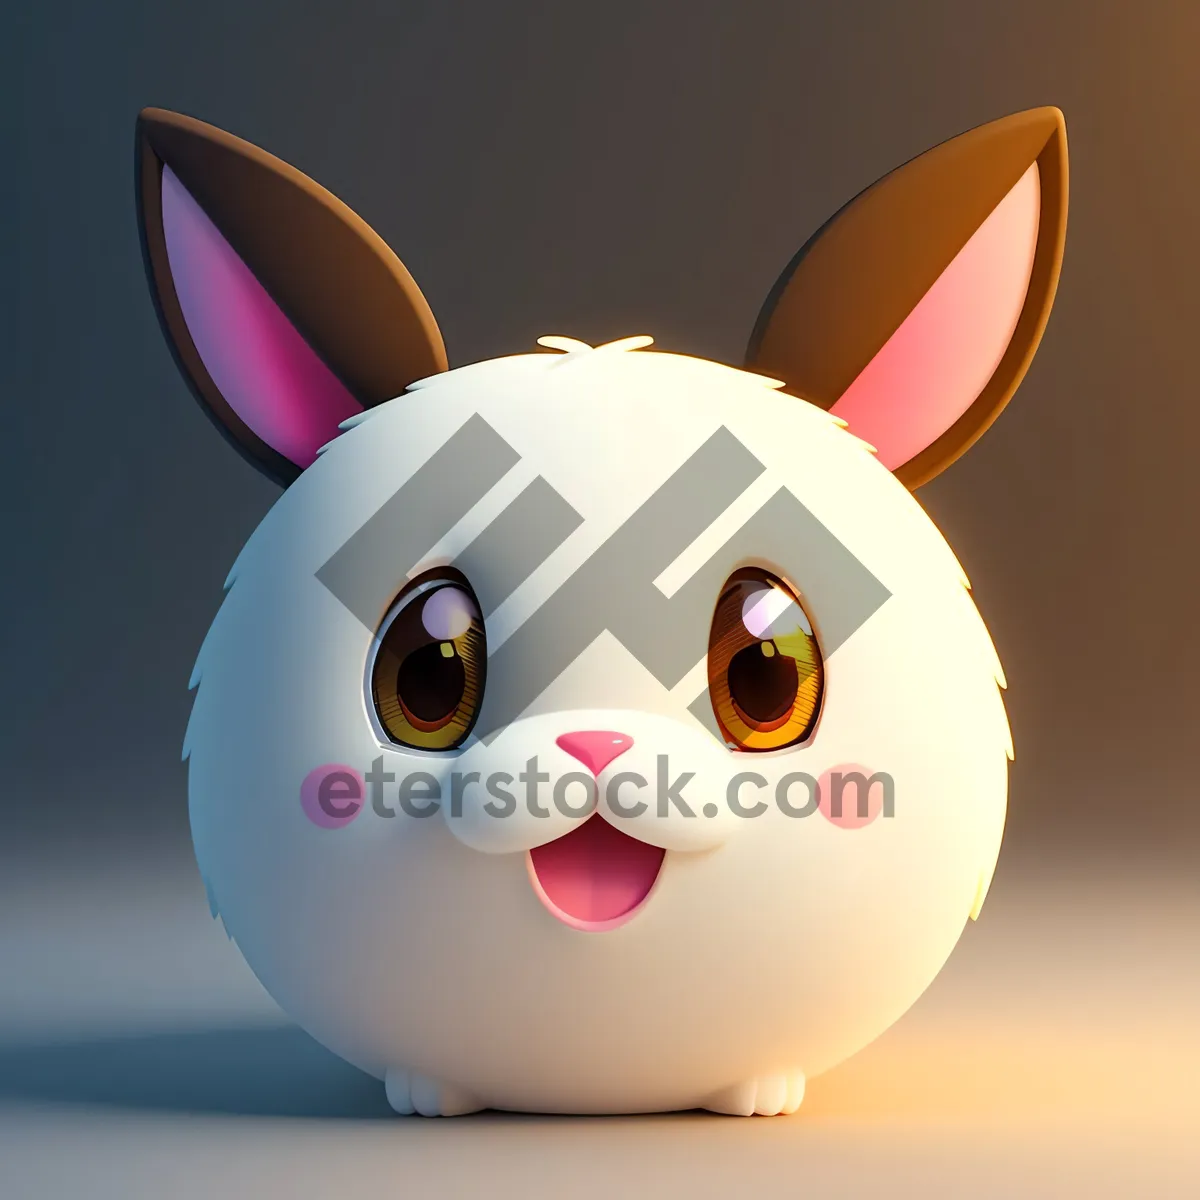 Picture of Cute Cartoon Bunny and Piggy Bank